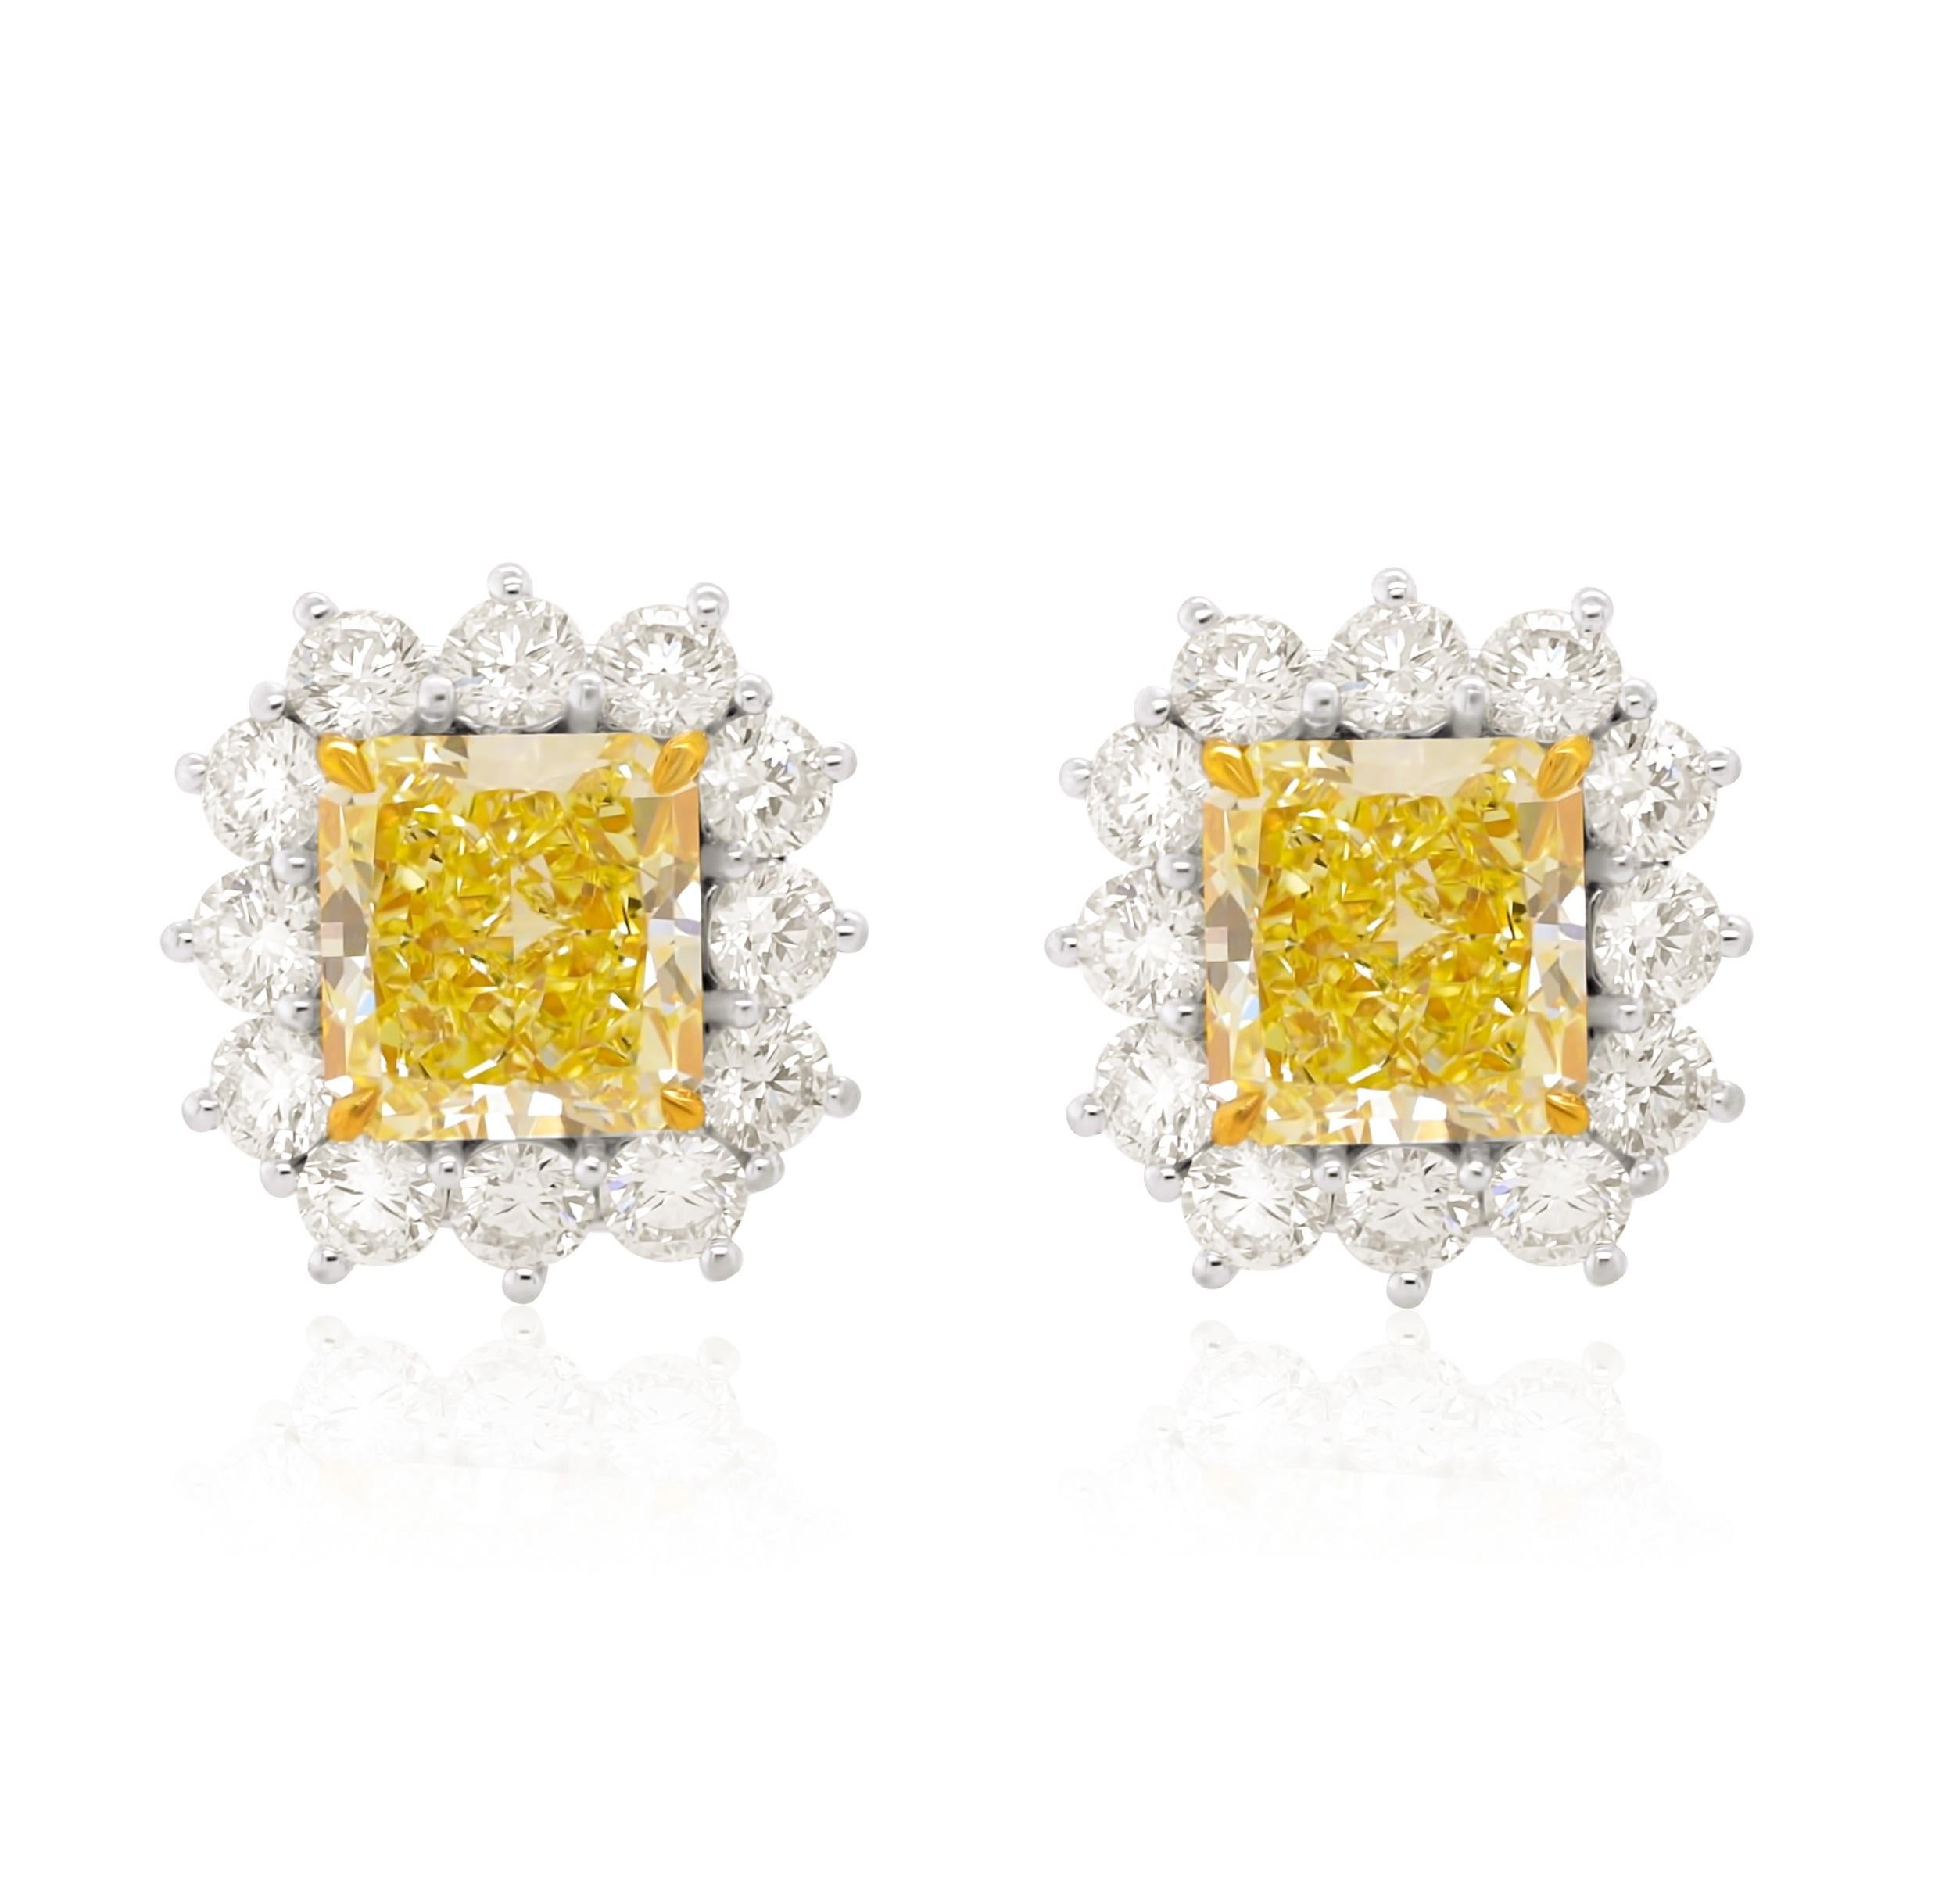 These beautiful earrings set with Natural Yellow Diamond totaling 6.79 Carats of Radiant Cut Fancy Light Yellow, VVS1 in clarity Diamonds, surrounded by 3.00 carats of diamonds. 
